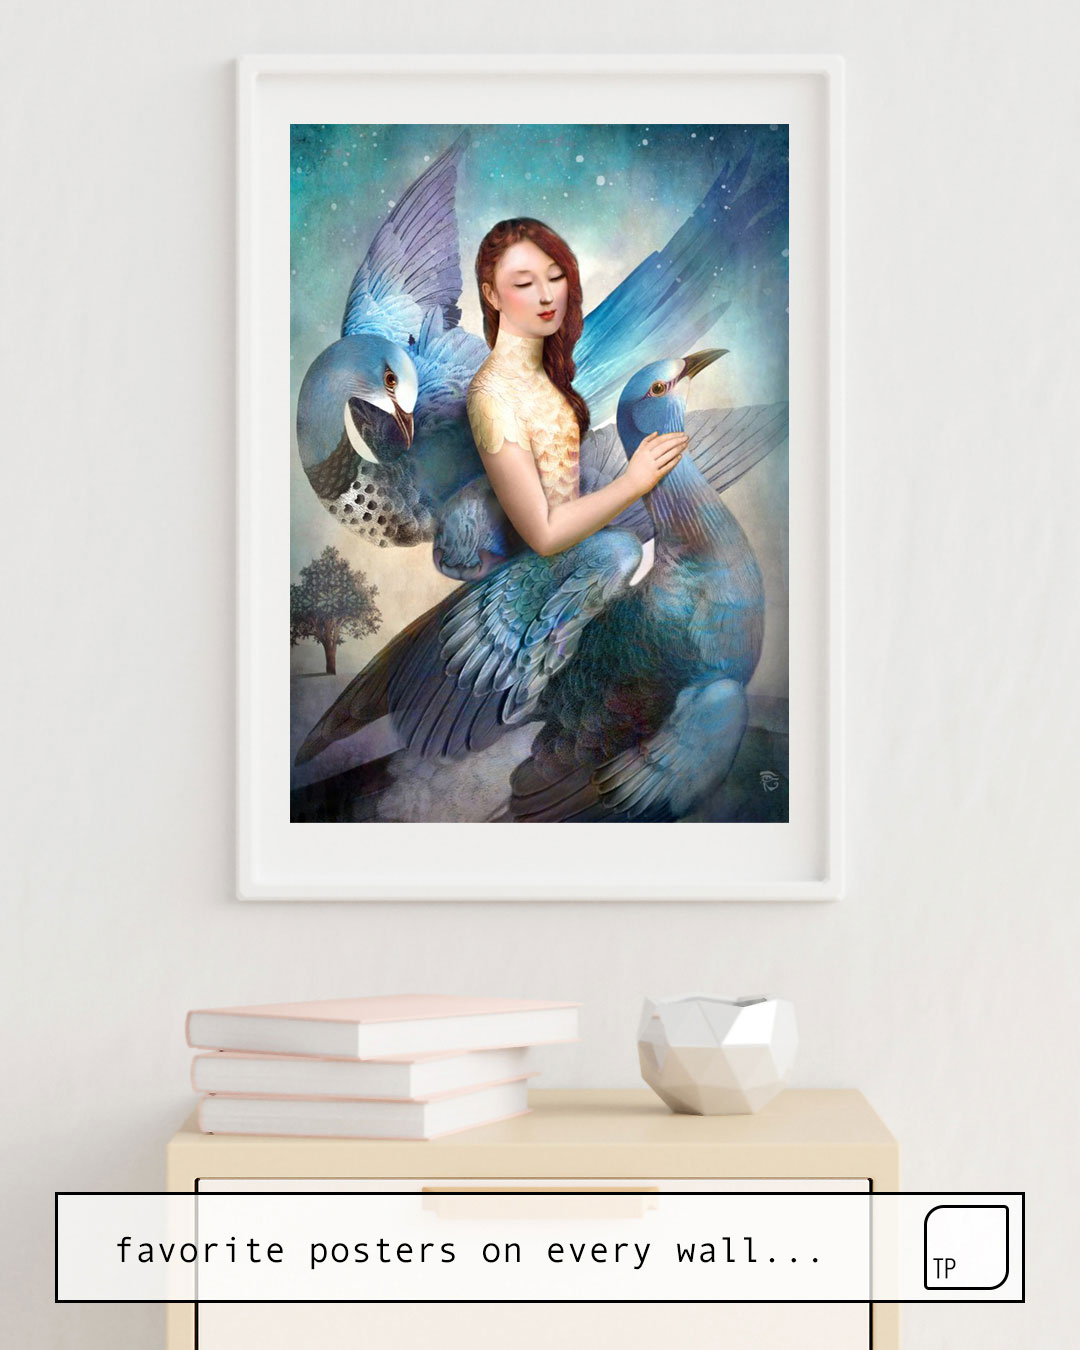 The photo shows an example of furnishing with the motif SKY DANCERS by Christian Schloe as mural